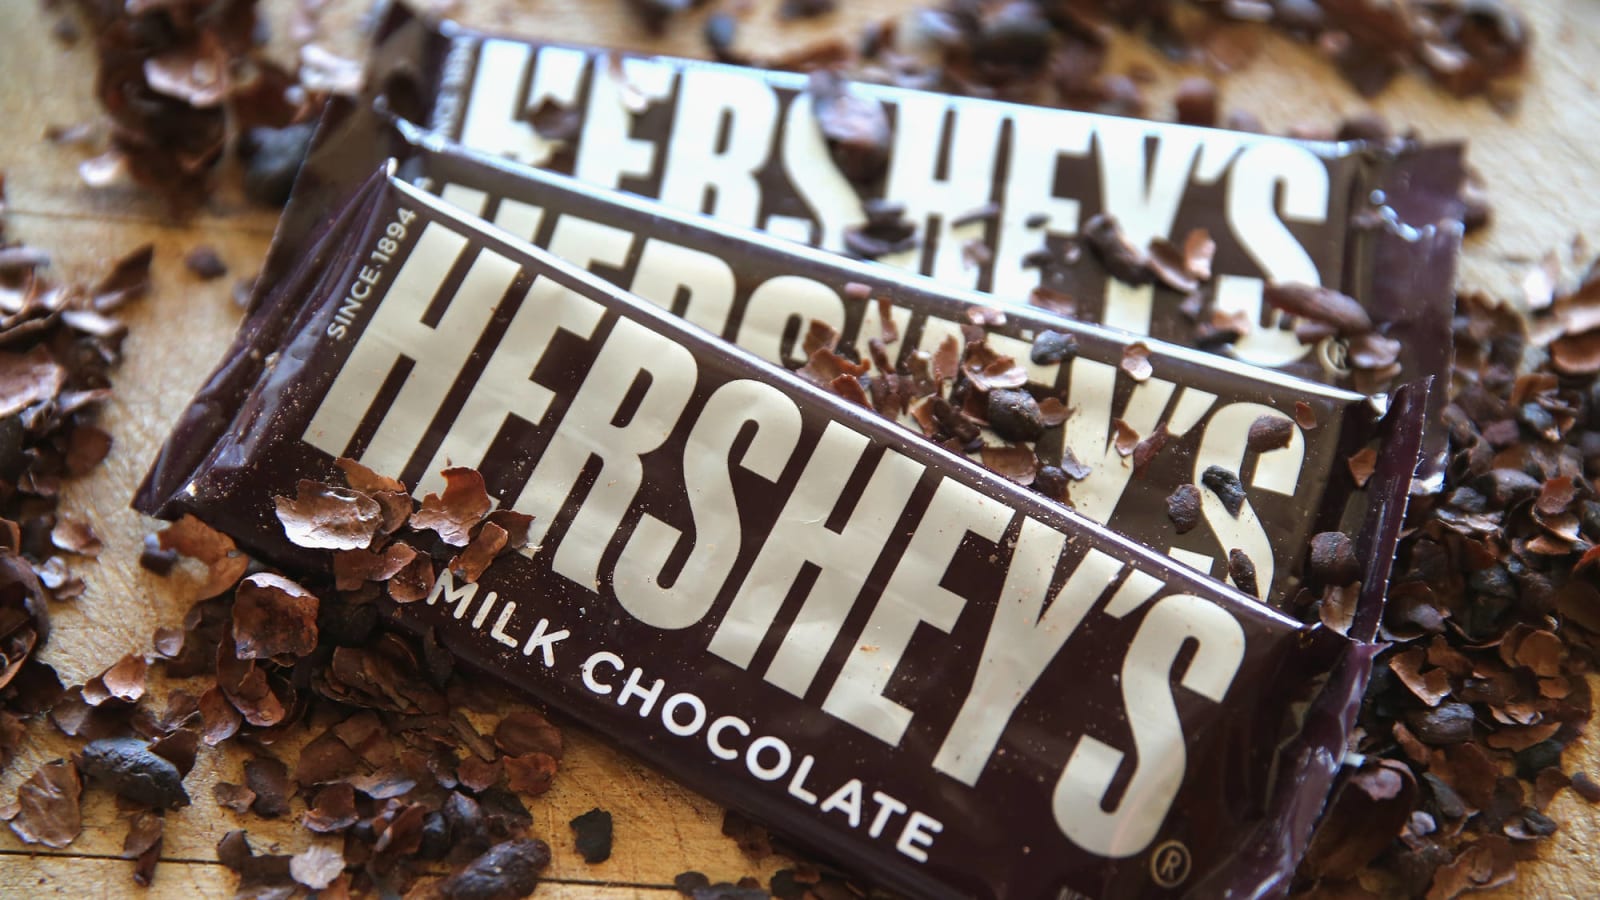 Our 20 favorite brands of chocolate